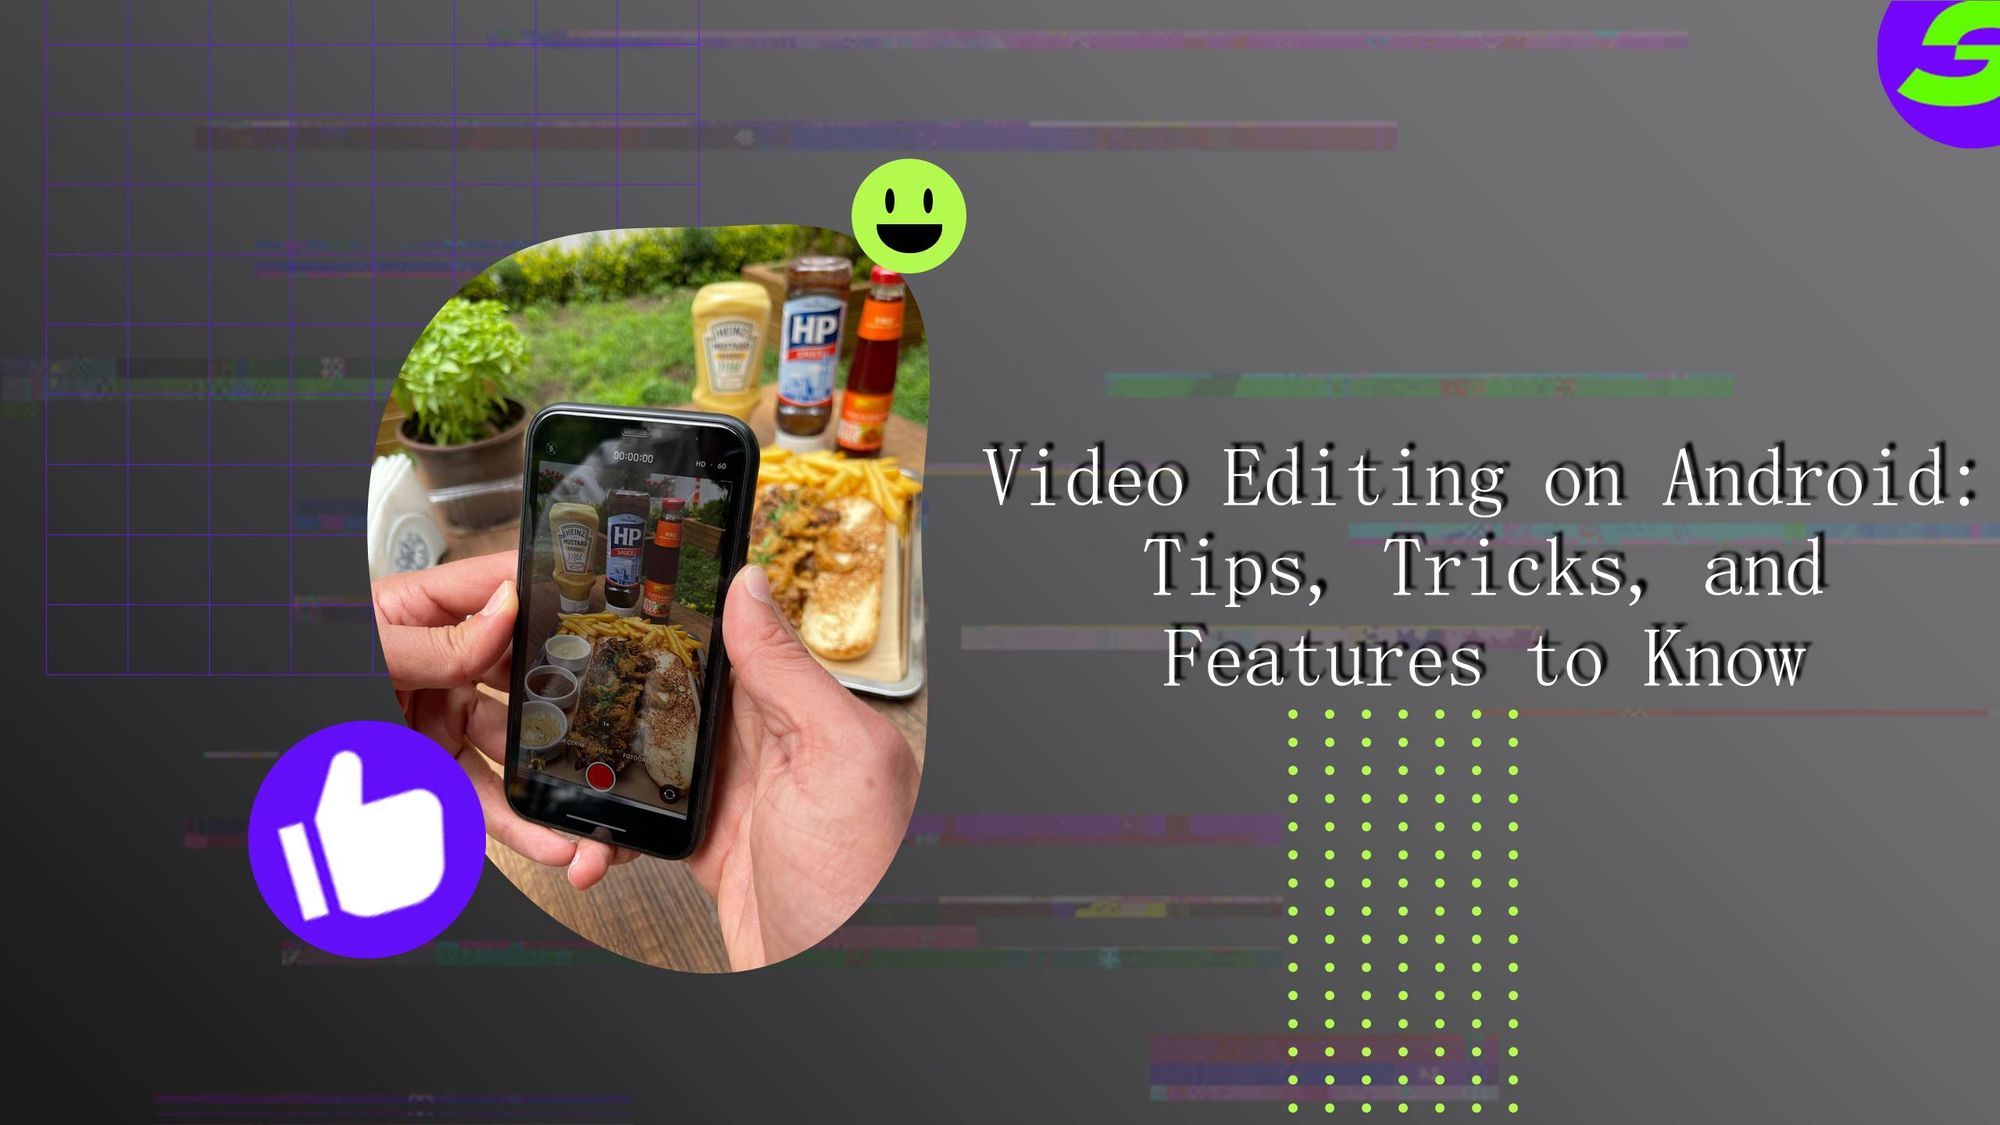 Tips and Tricks of Video Editing on Android